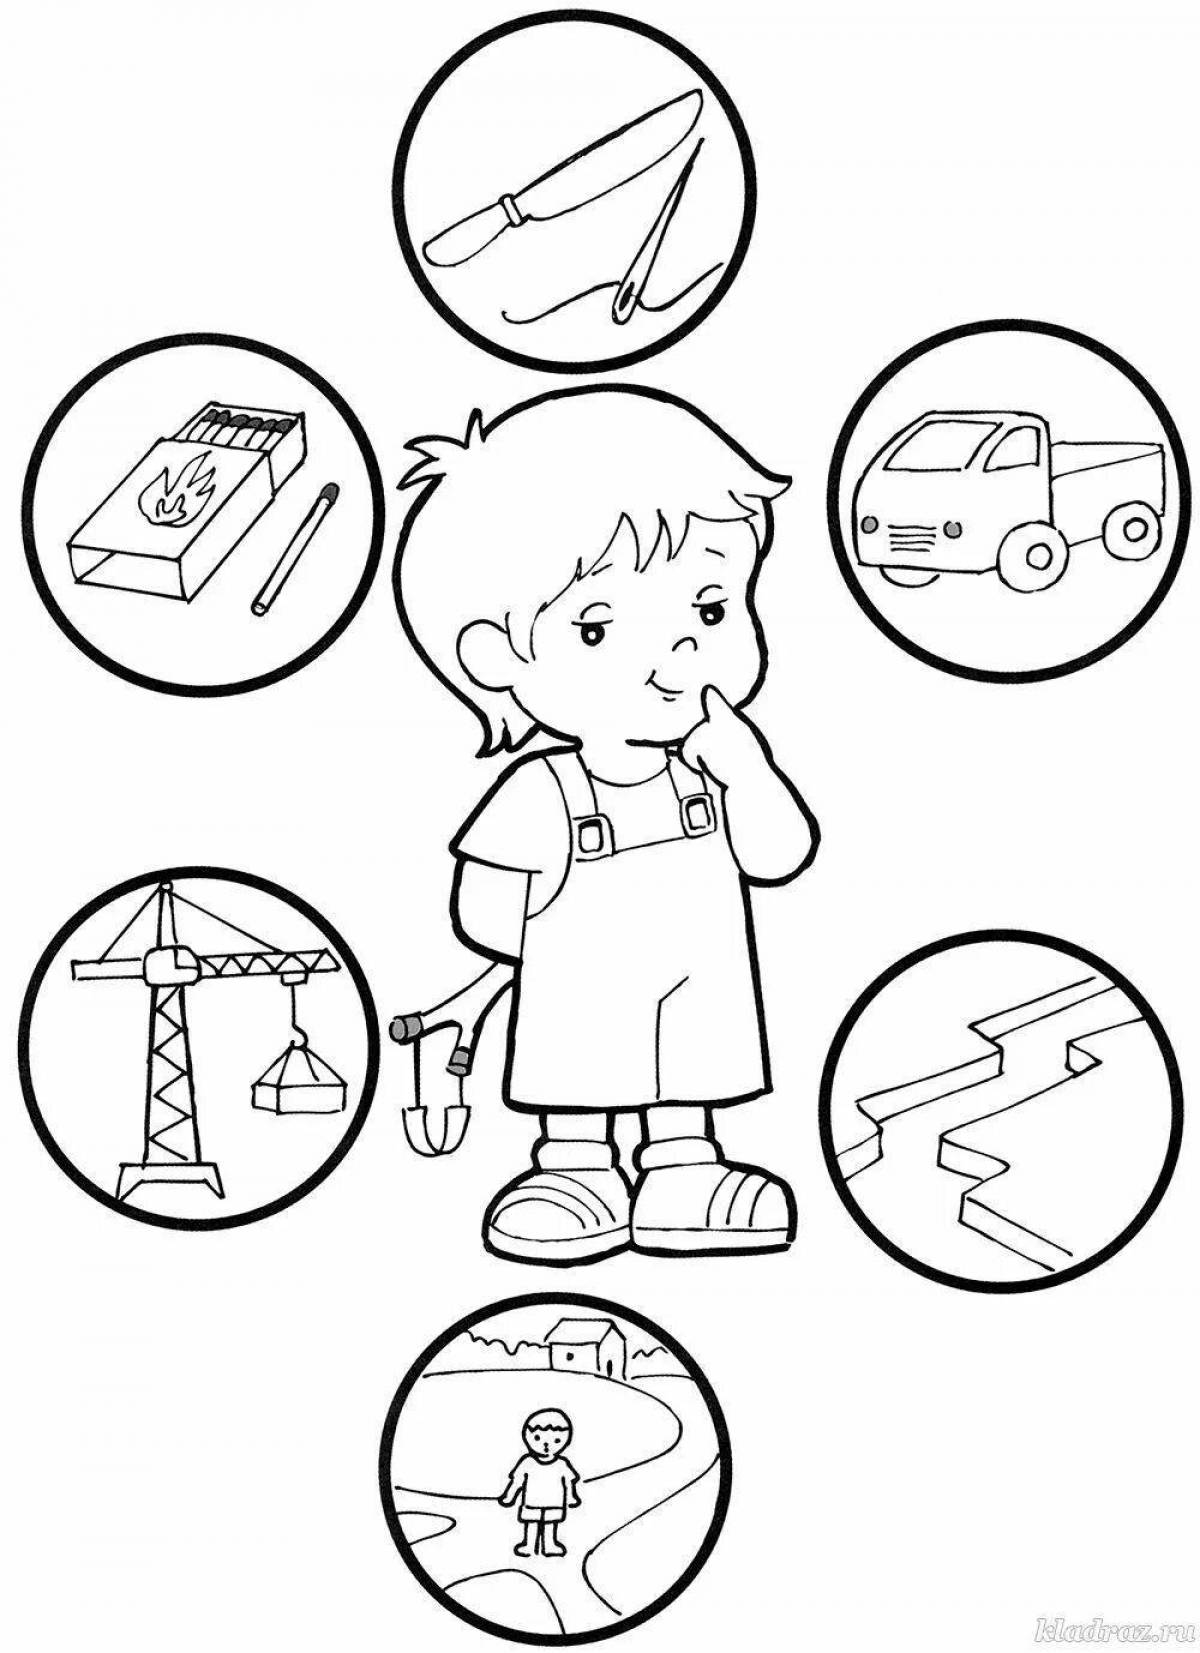 Electrical safety information coloring page